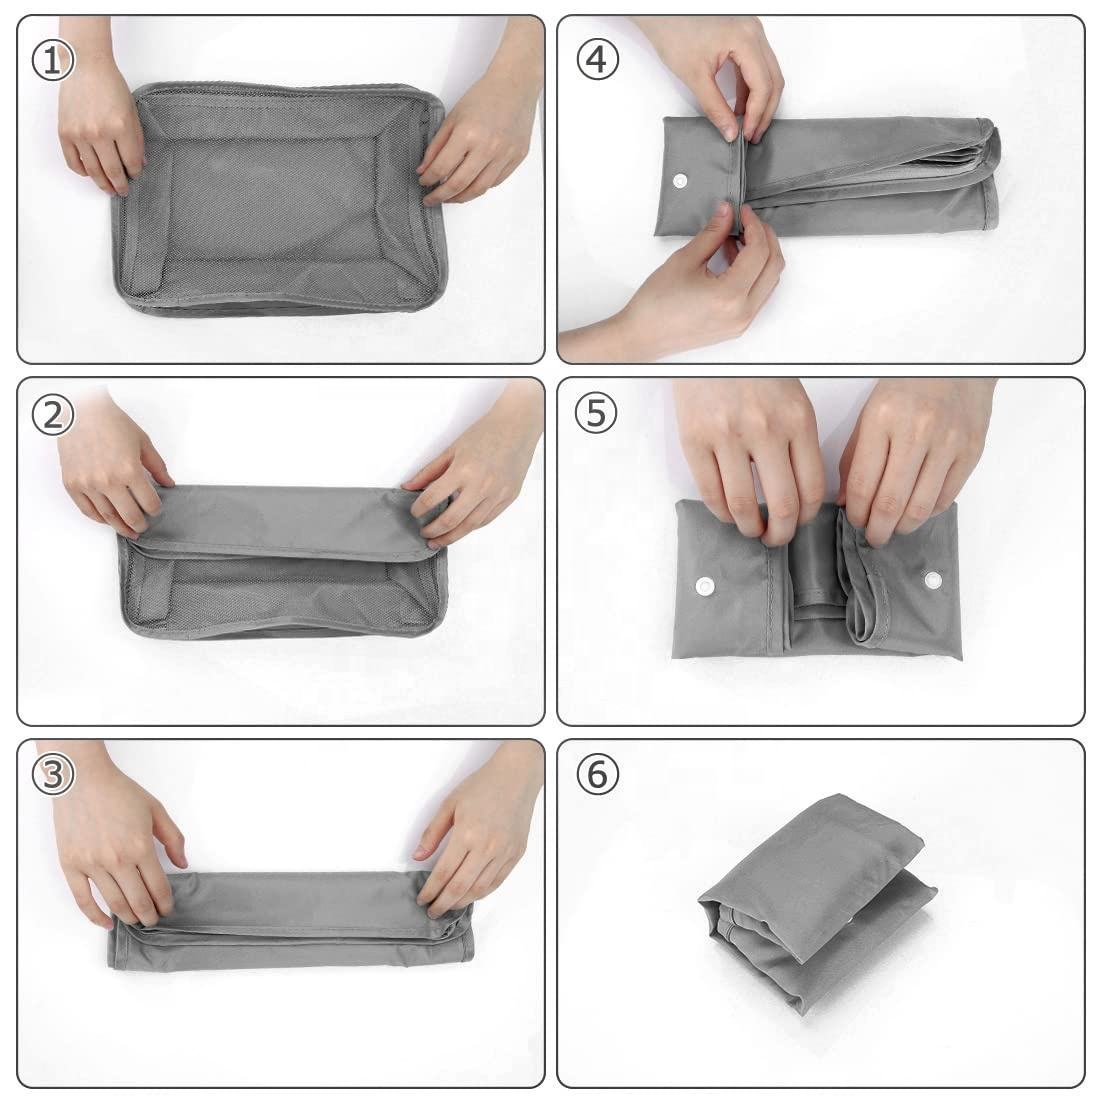 Hot Sale 11pack Suitcase Travel Storage Accessories Organizer Bag Portable Cloth Packing Cubes Compression